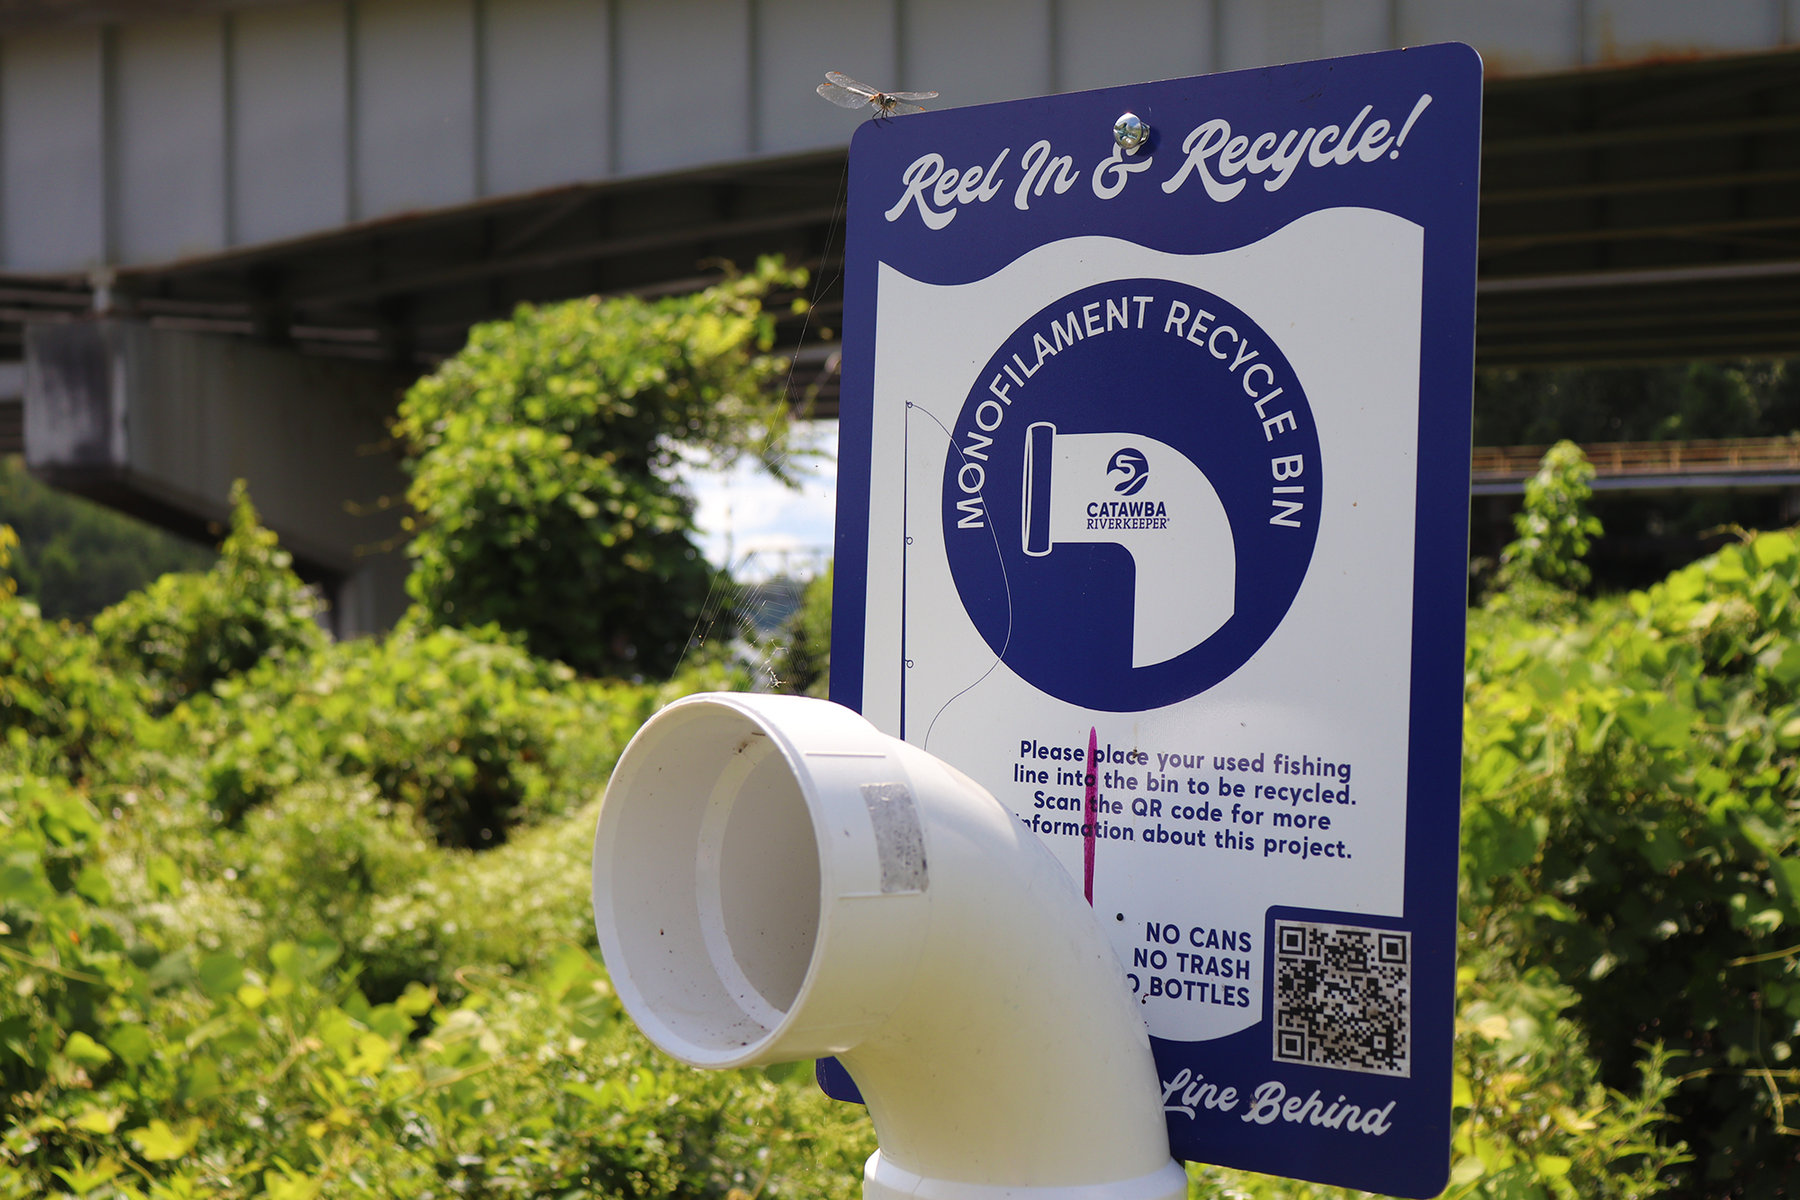 Reel in and recycle monofilament recycle bin constructed out of PVC pipe located next to the Catawba river in Fort Lawn, South Carolina.